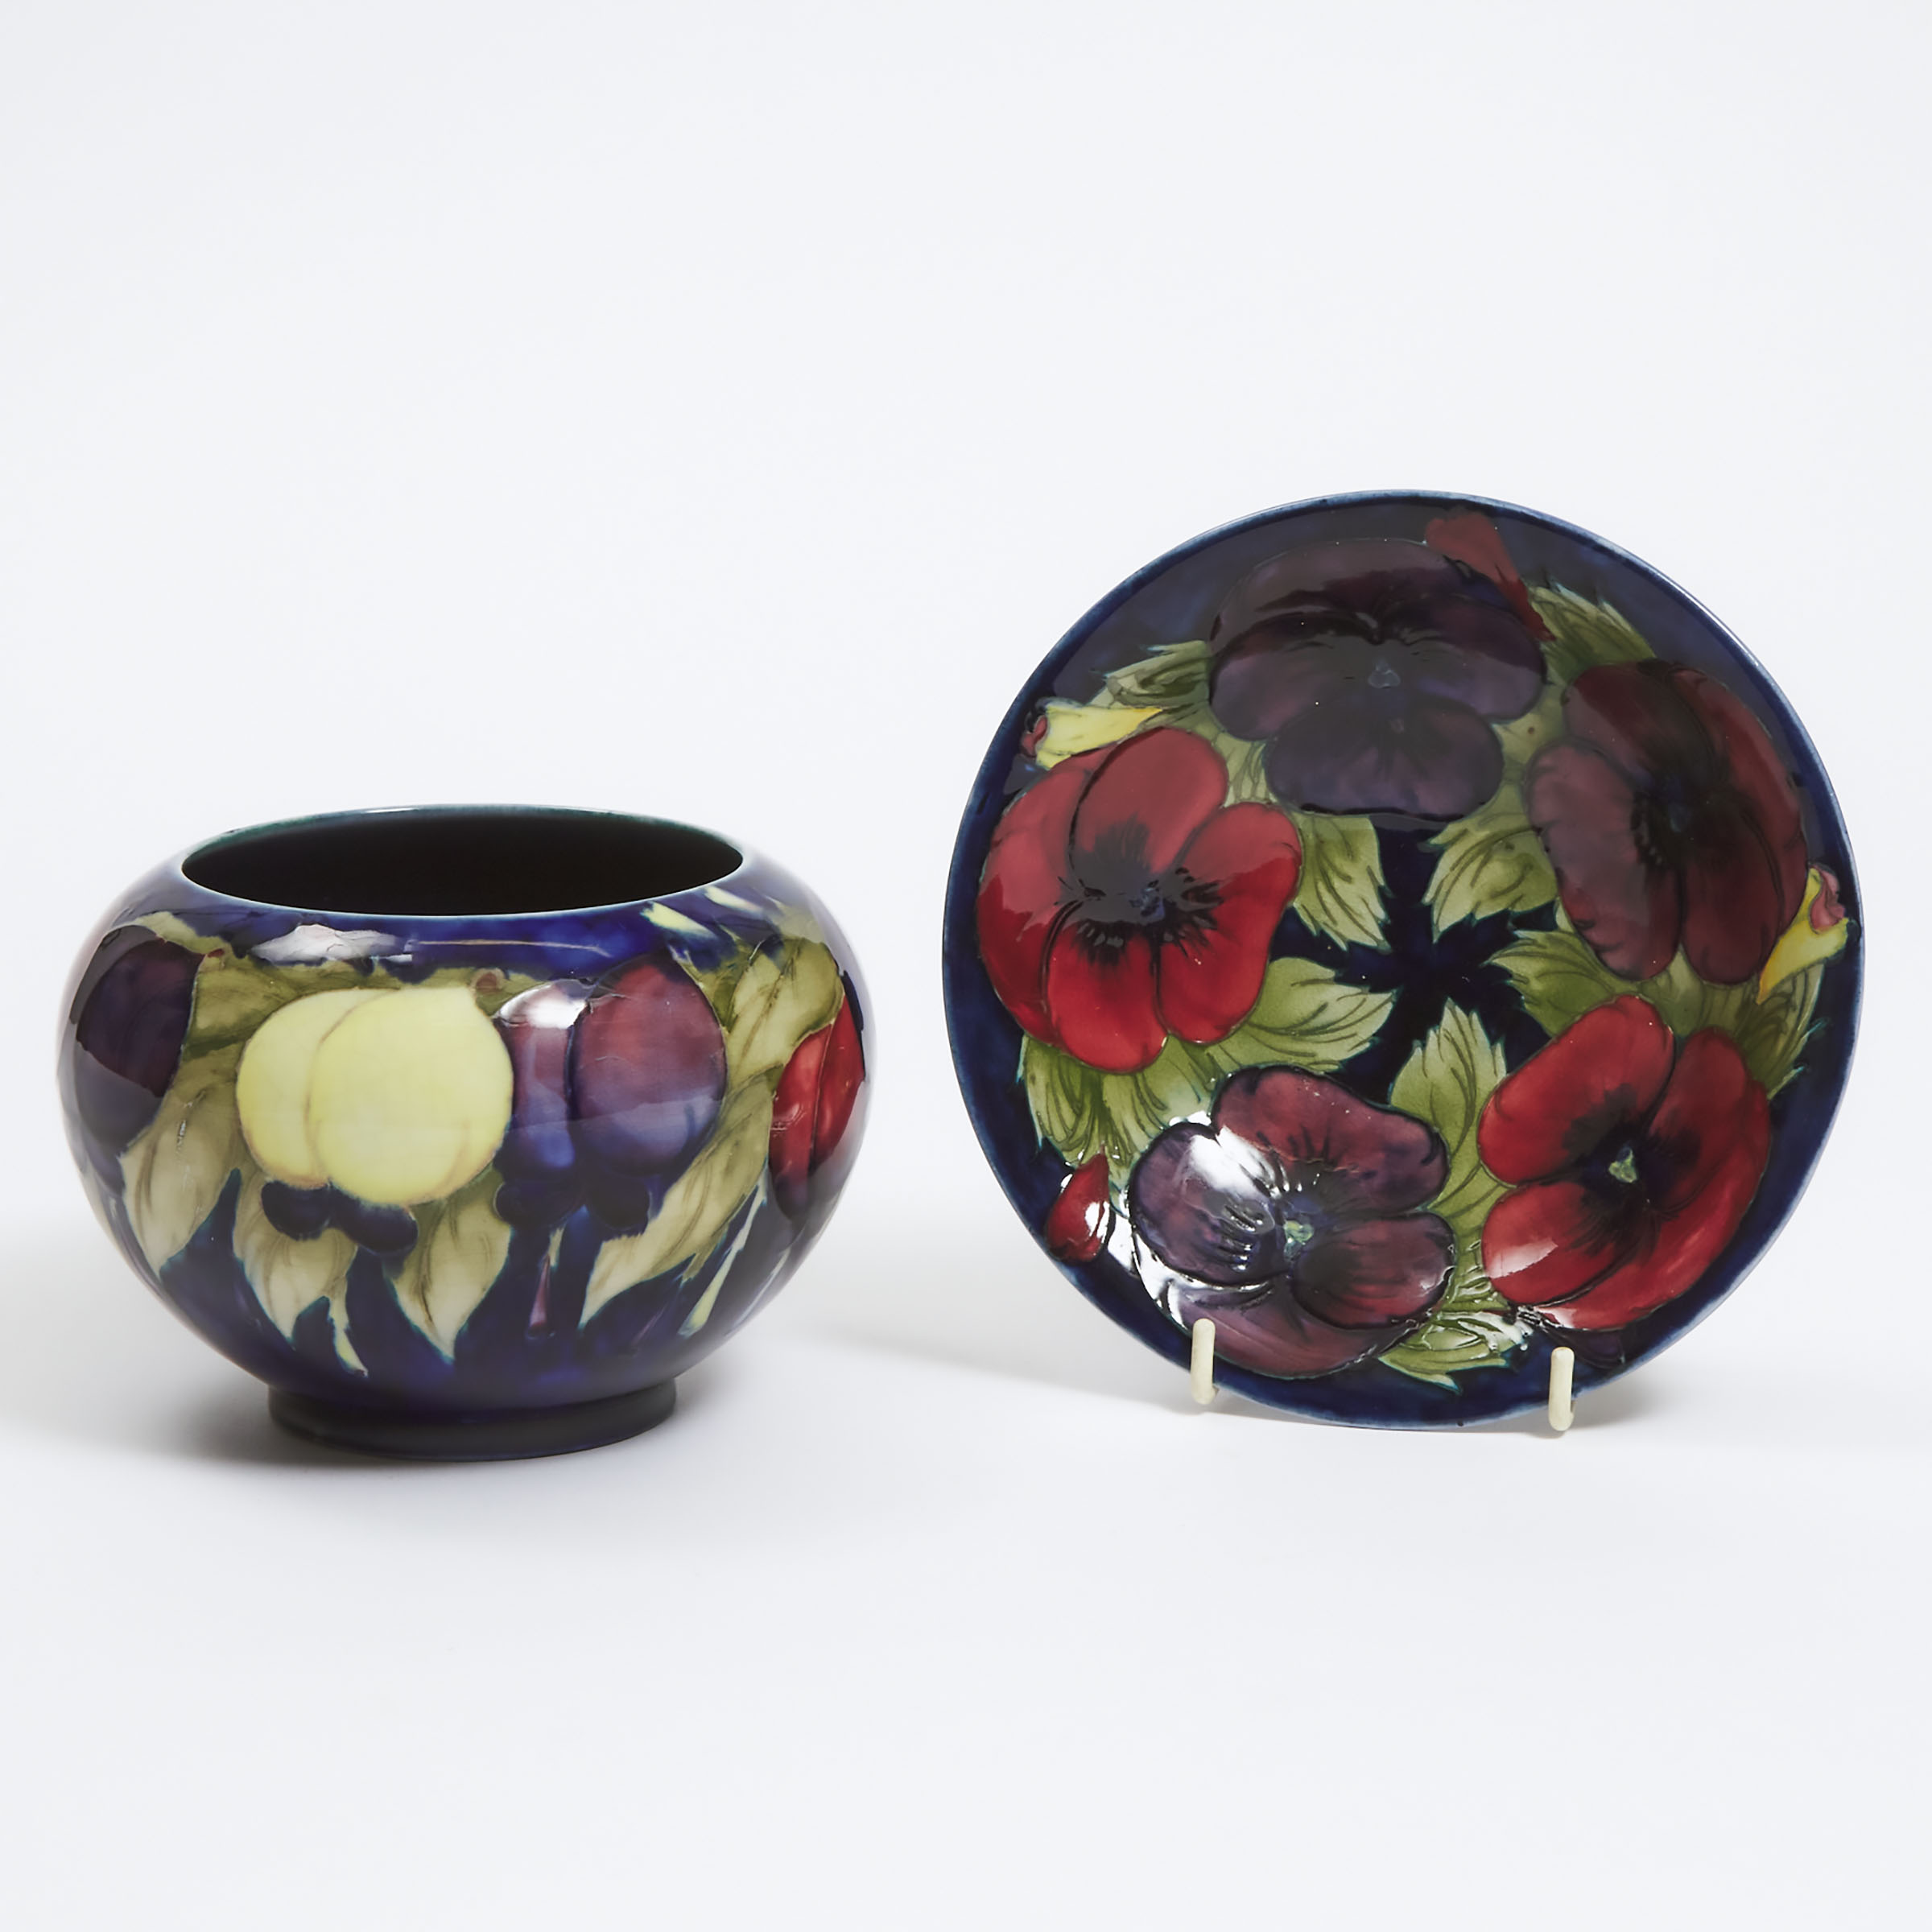 Moorcroft Wisteria Vase and Small Pansy Bowl, c.1925